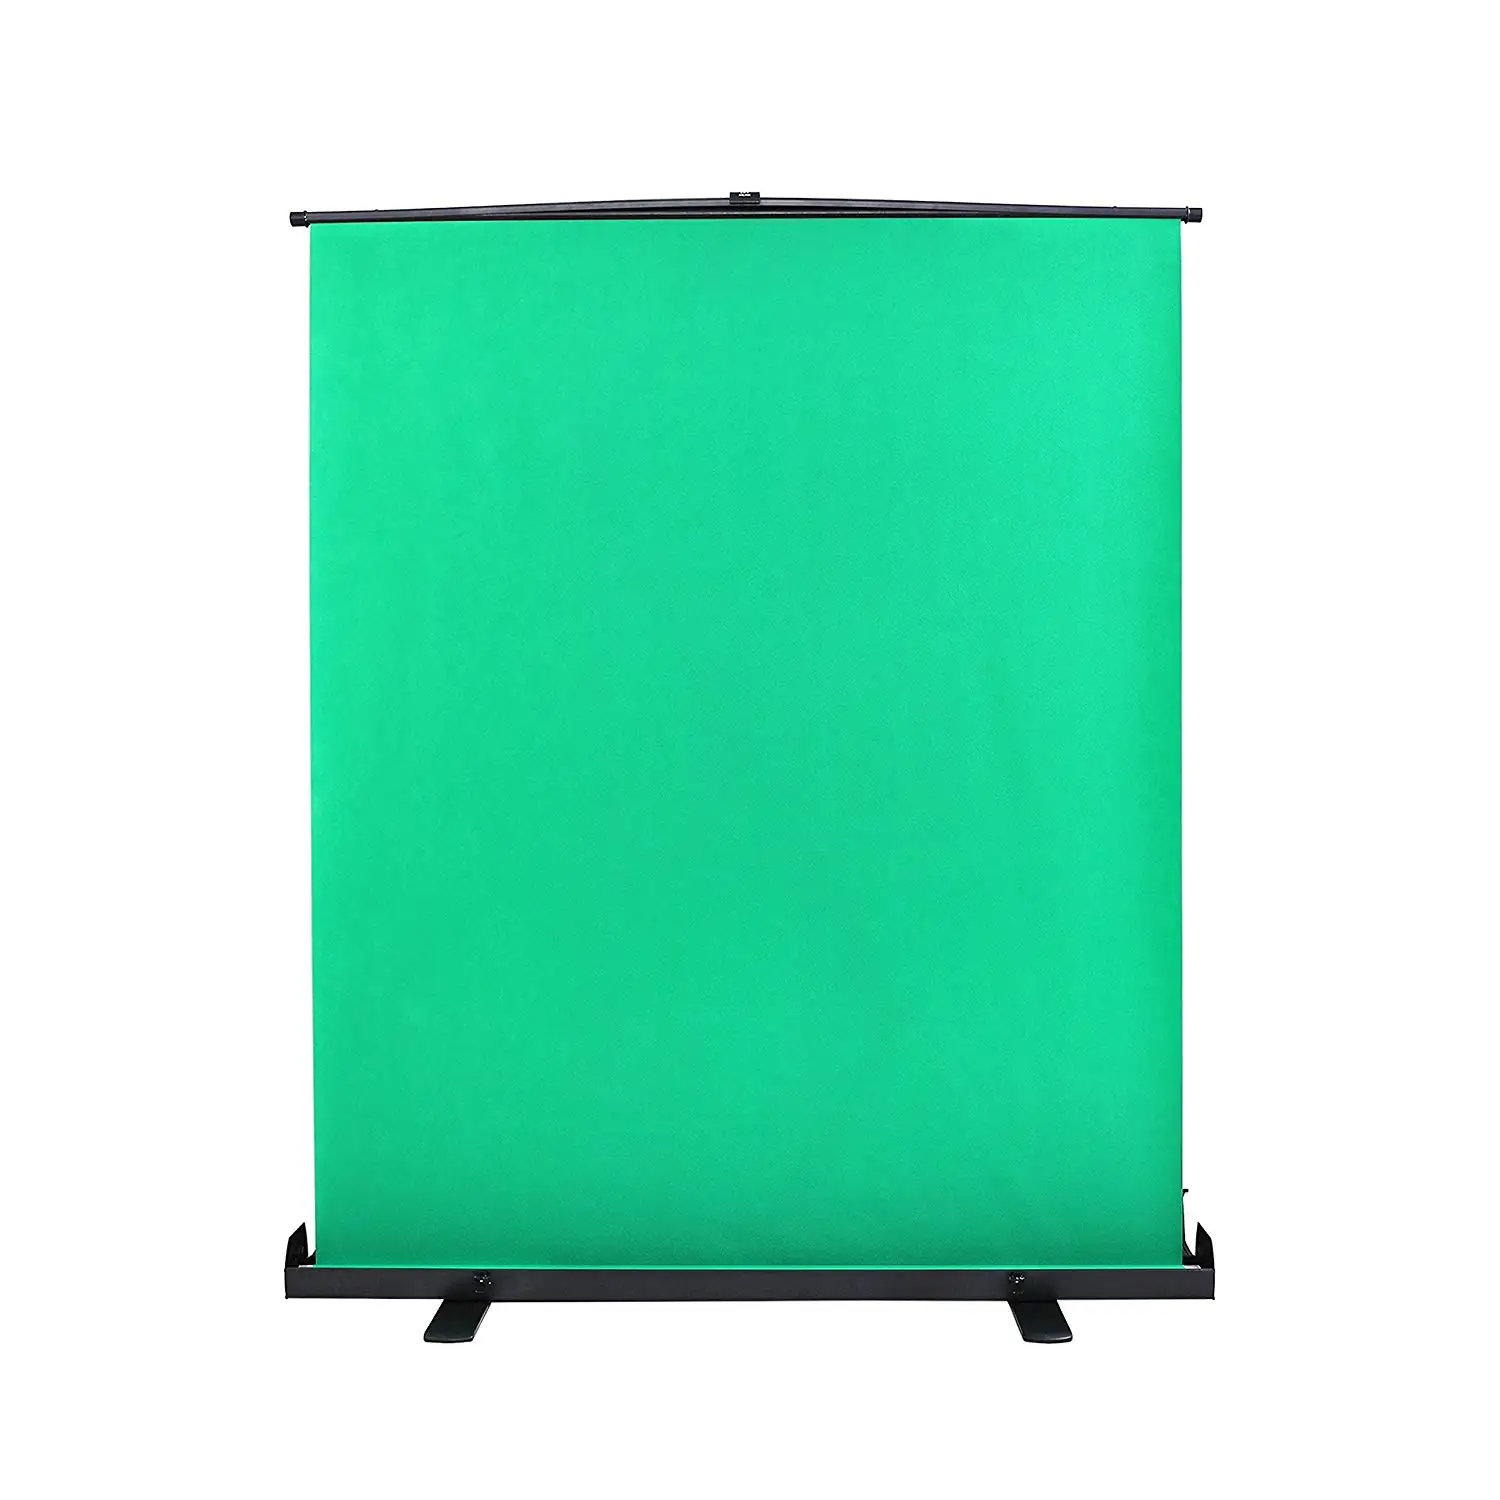 Auto-Locking Air Cushion Frame Emart Green Screen Solid Safety Aluminium Base Collapsible Chromakey Panel for Photo Backdrop Video Studio,Portable Pull Up Wrinkle-Resistant Greenscreen Background